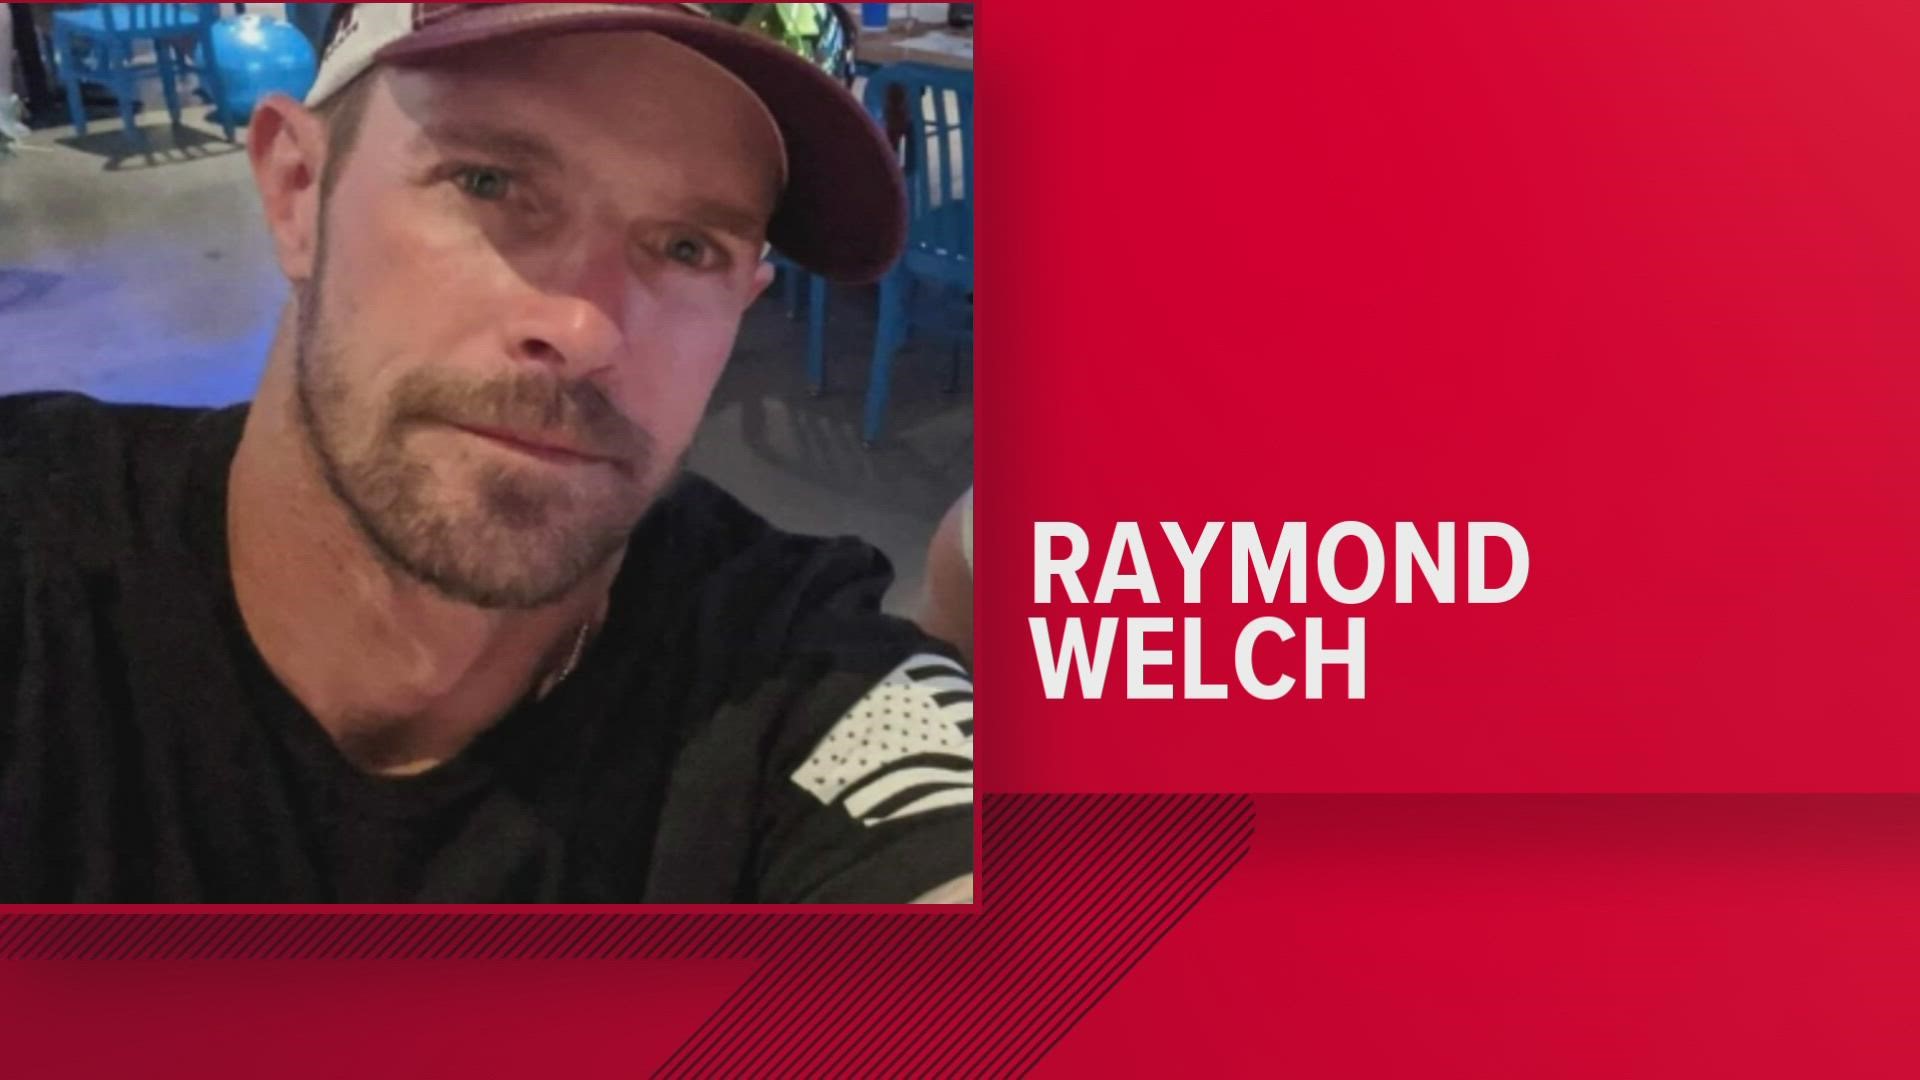 41-year-old Raymond Welch was reported missing on Saturday, Oct. 15.